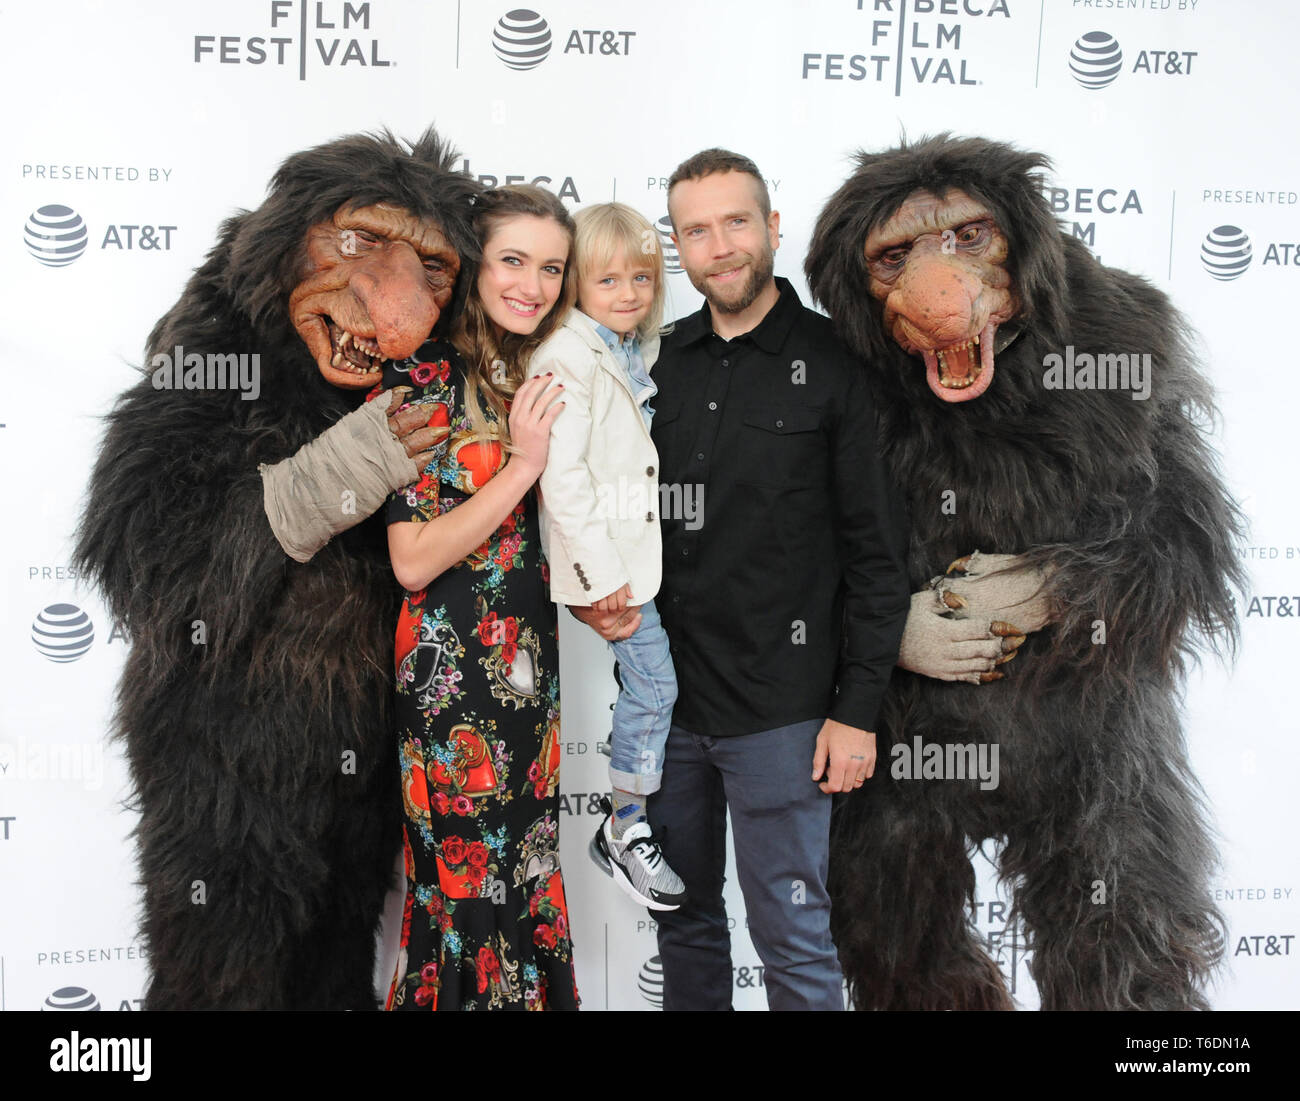 April 27, 2019 - New York, New York, U.S. - Nicole Elizabeth Berger, Bodhi Palmer and Mark Webber with Grumblers at the 2019 Tribeca Film Festival Premiere of ''The Place Of No Words'', held at the SVA Theater in Chelsea in New York, New York, USA, 27 April 2019 (Credit Image: © Ylmj/AdMedia via ZUMA Wire) Stock Photo